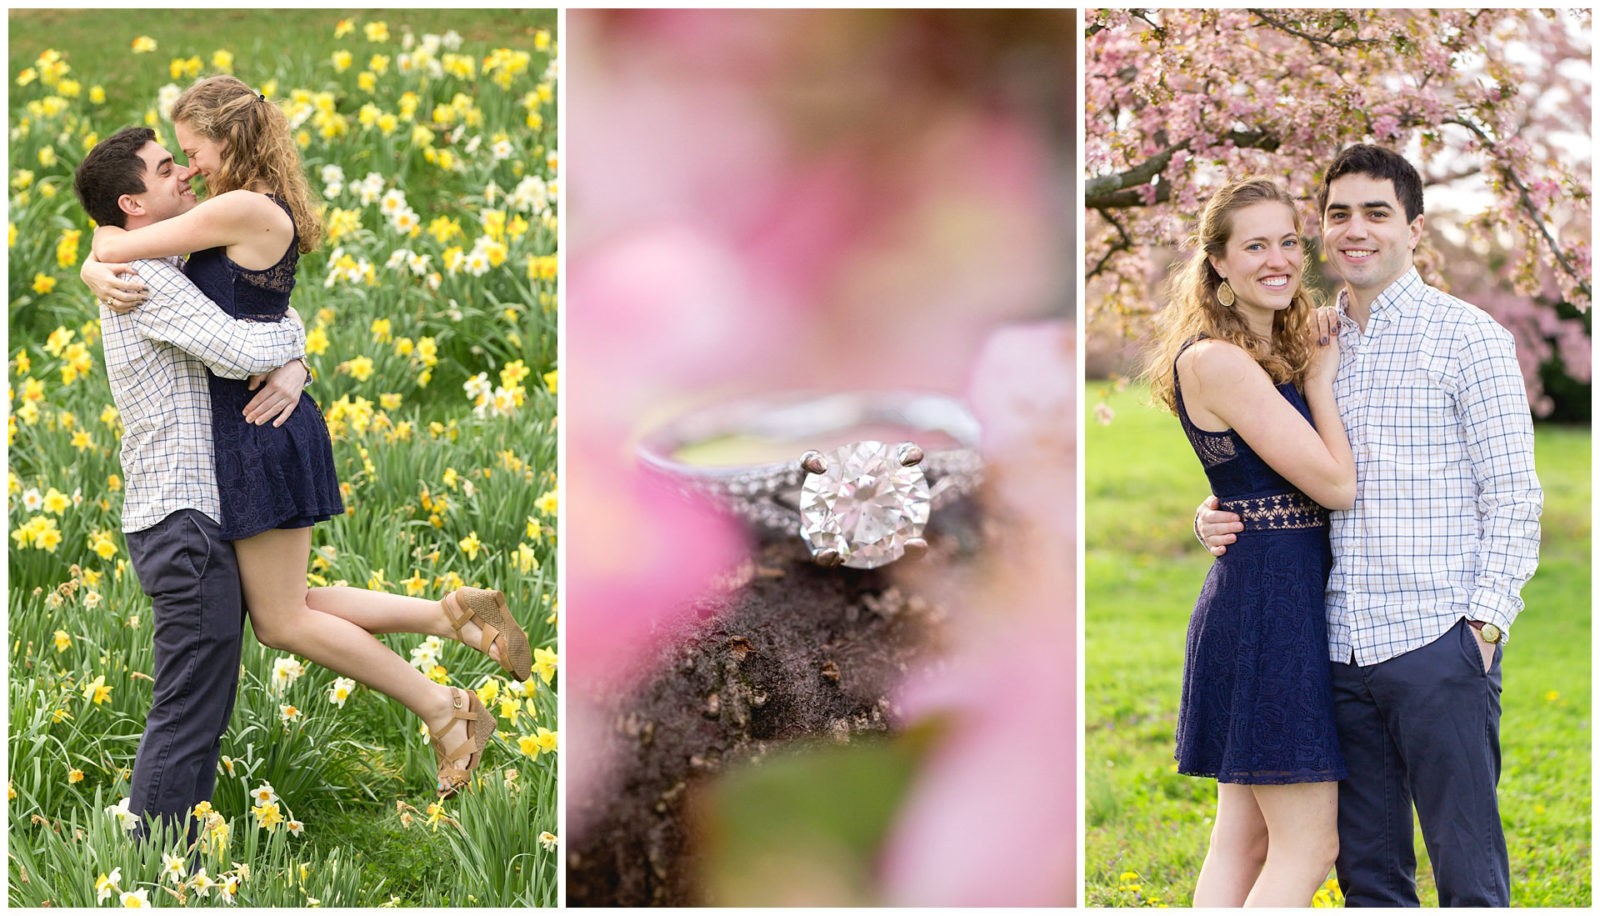 Spring engagement session at the Arboretum in Lexington, KY